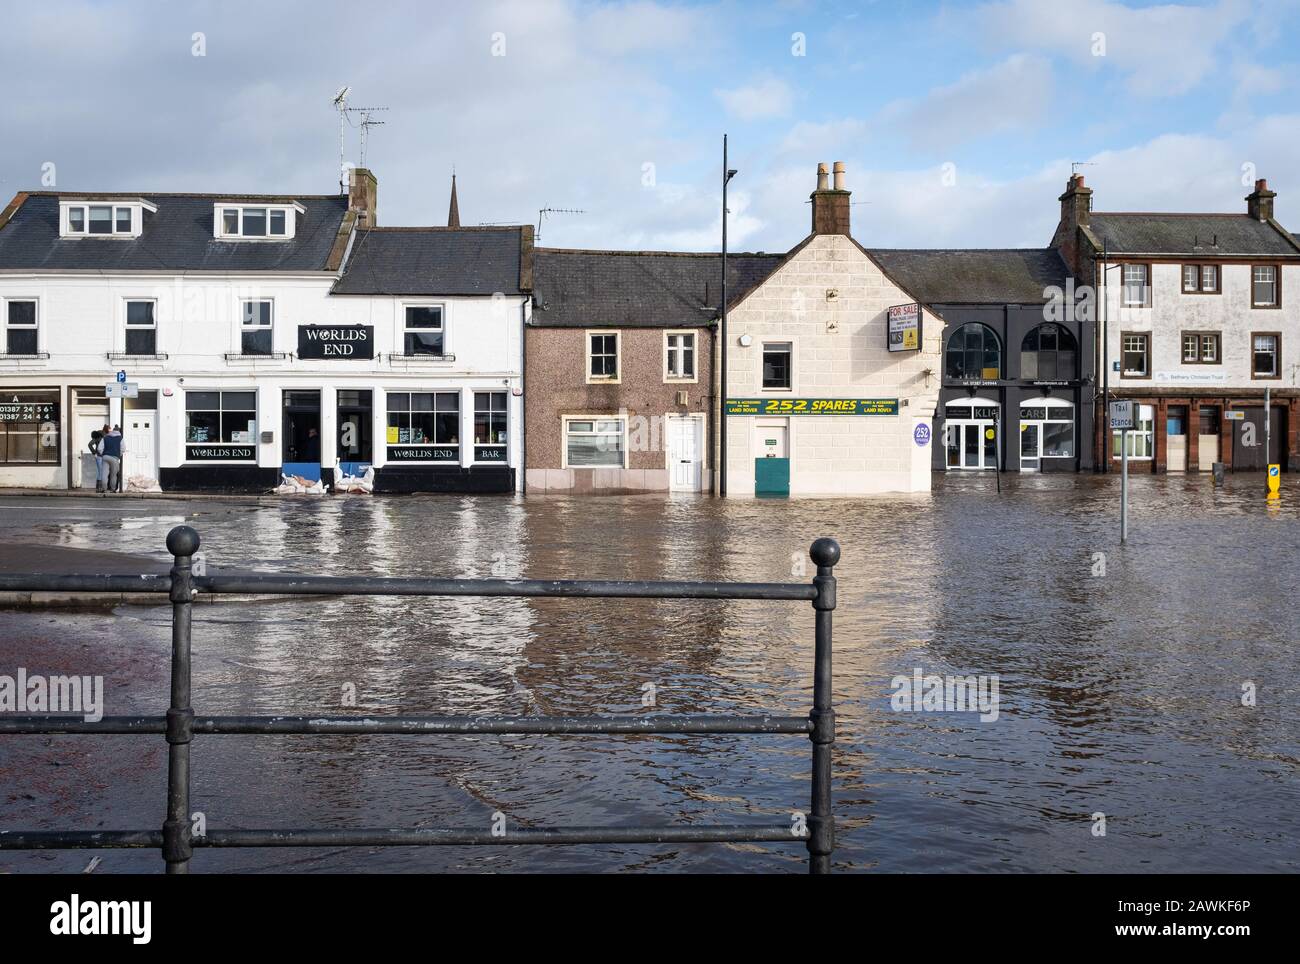 A view of flooding at the Whitesands in Dumfries, Scotland, on the 9th February 2020 as a result of Storm Ciara. Stock Photo